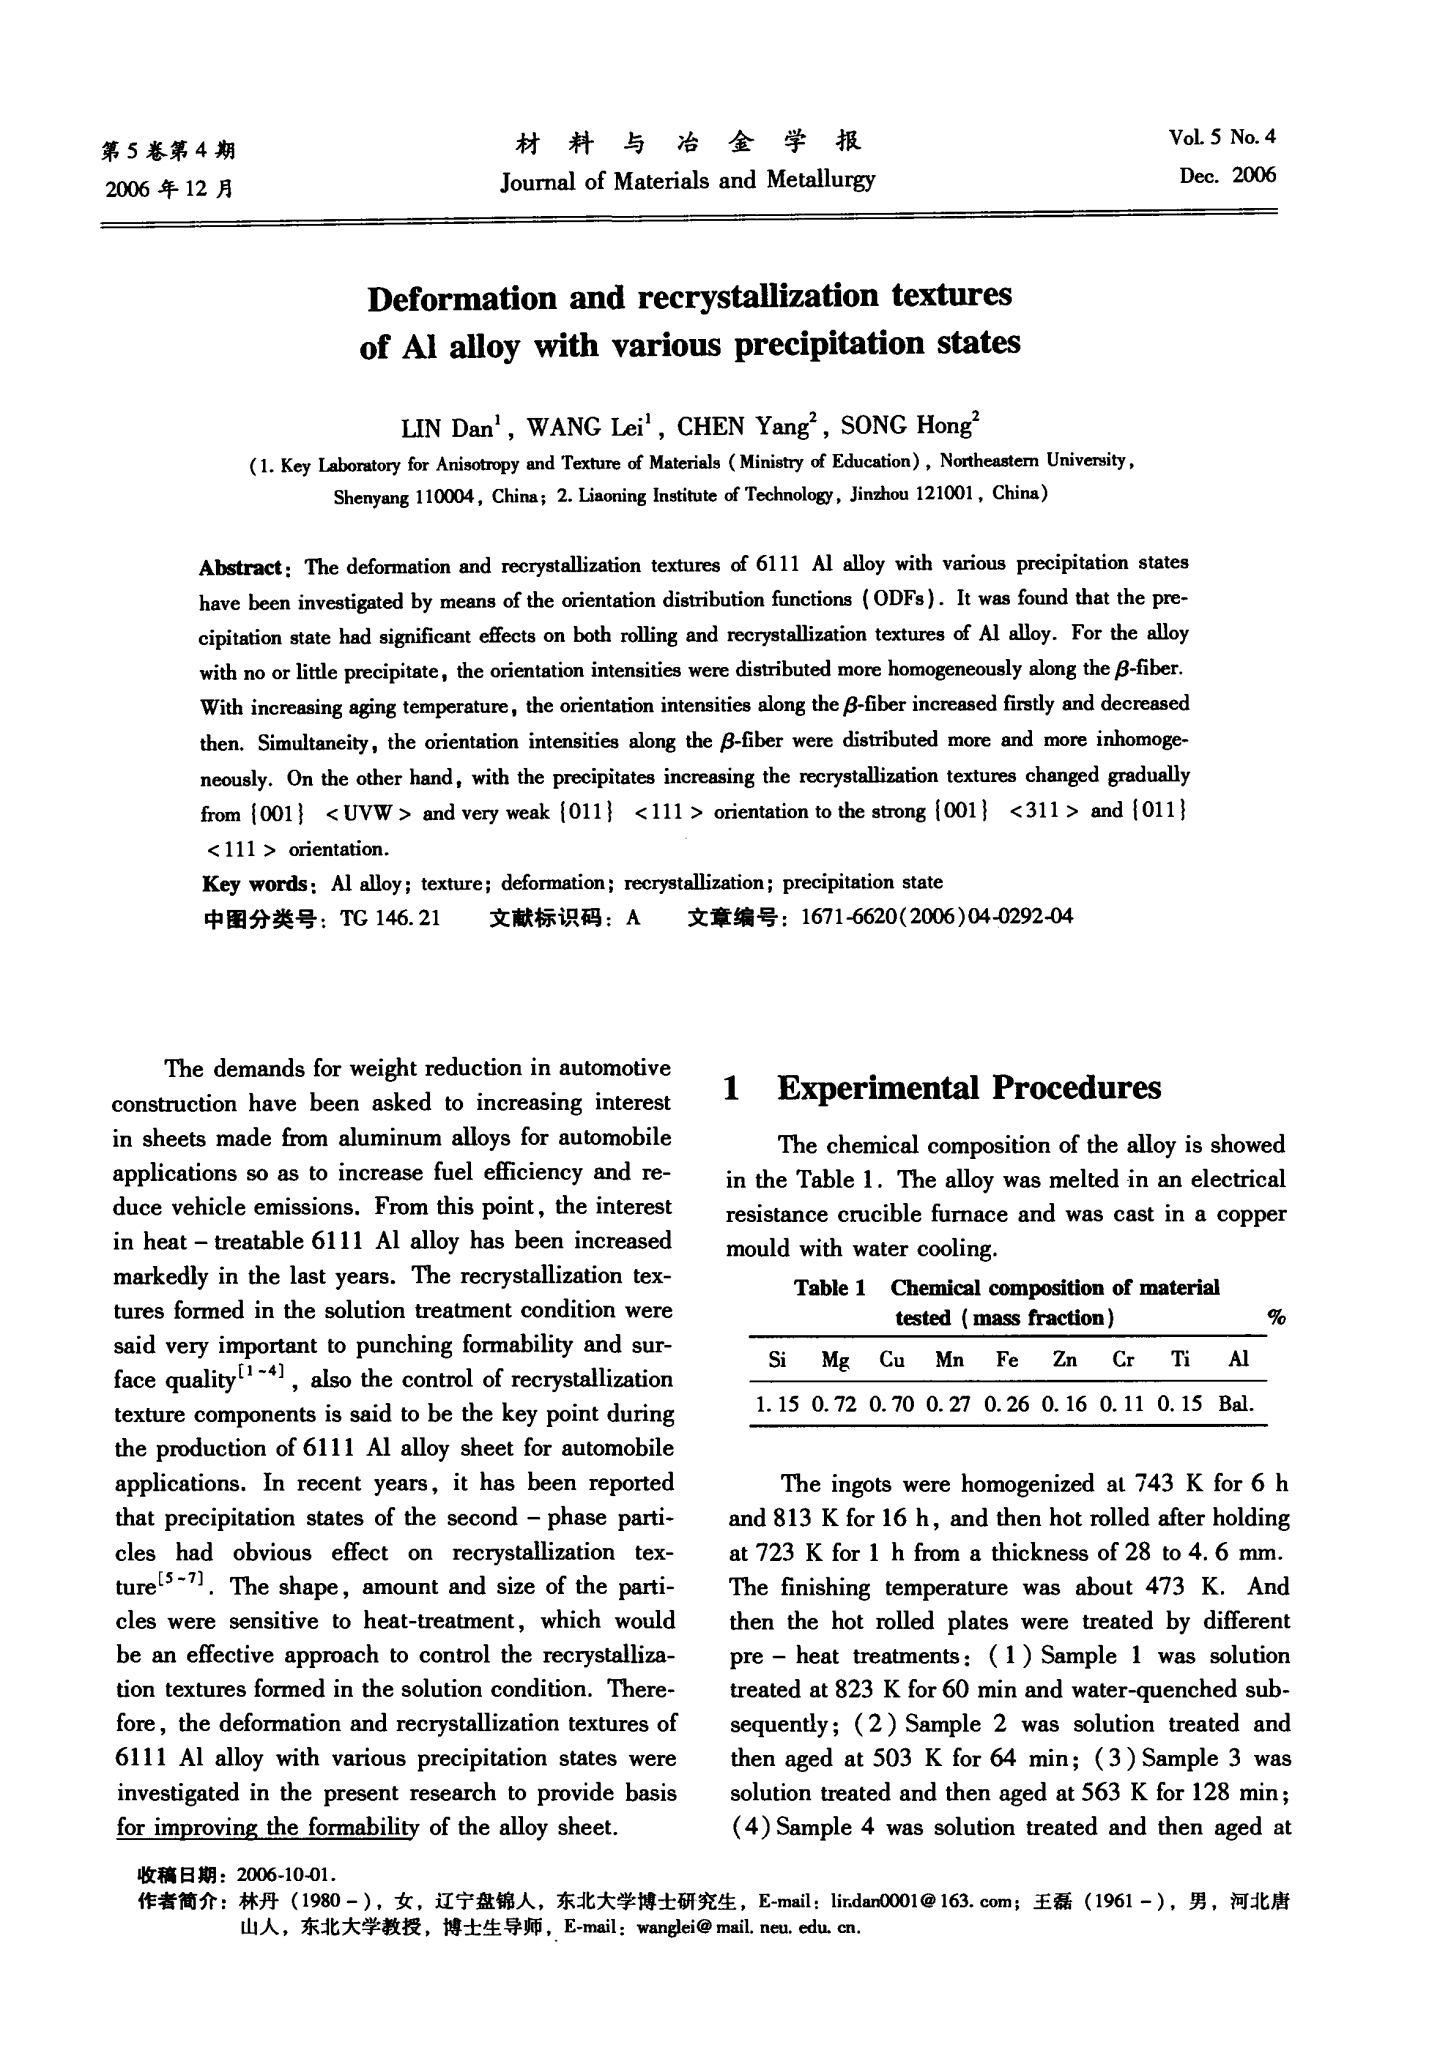 Deformation and recrystallization textures of AI alloy with various precipitation states